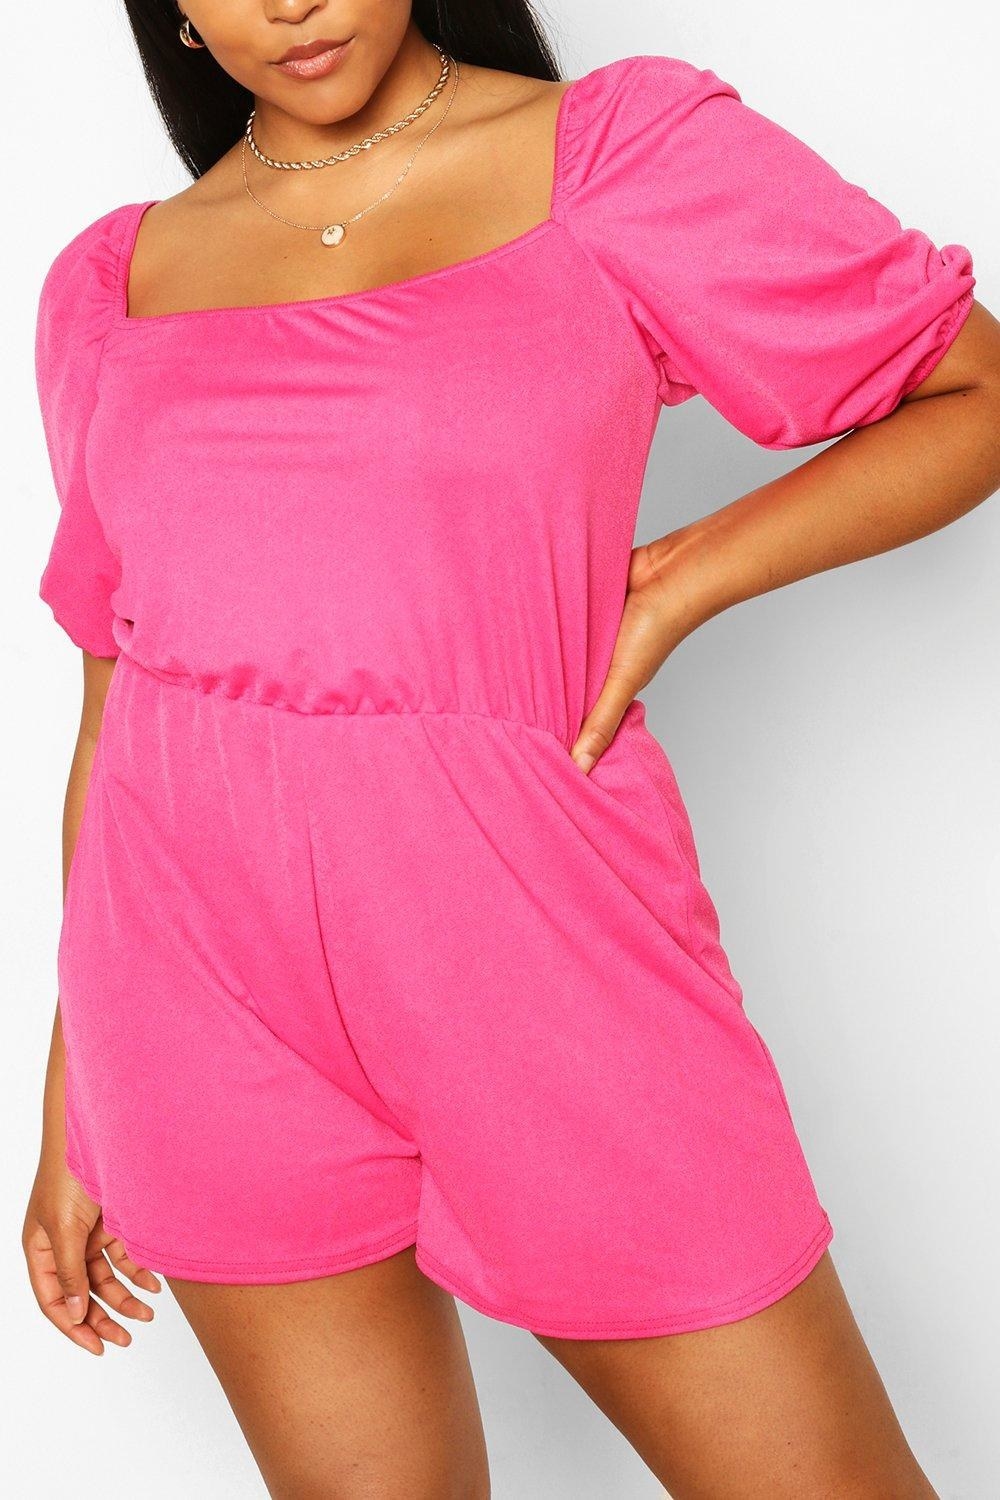 A model wearing the romper in bright pink